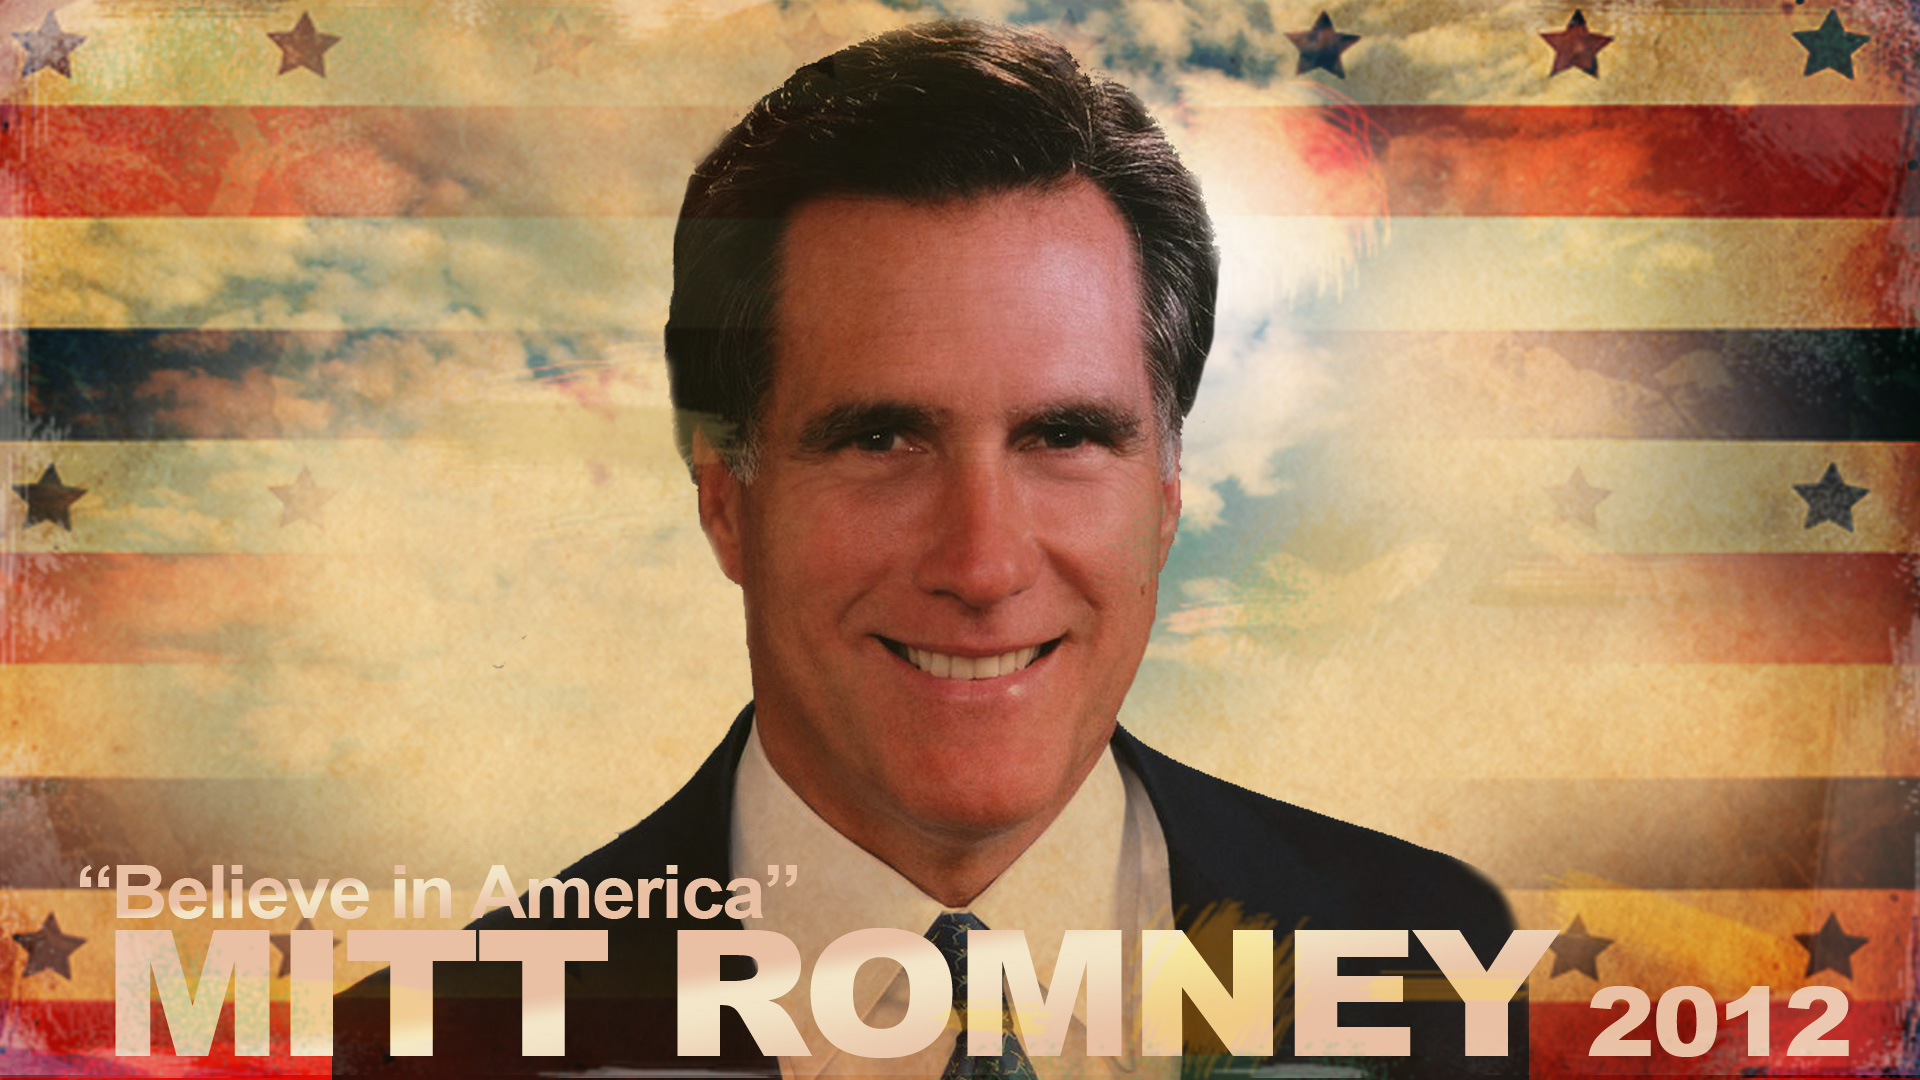 CATHOLICS FOR ROMNEY | ***Coming Soon***1920 x 1080